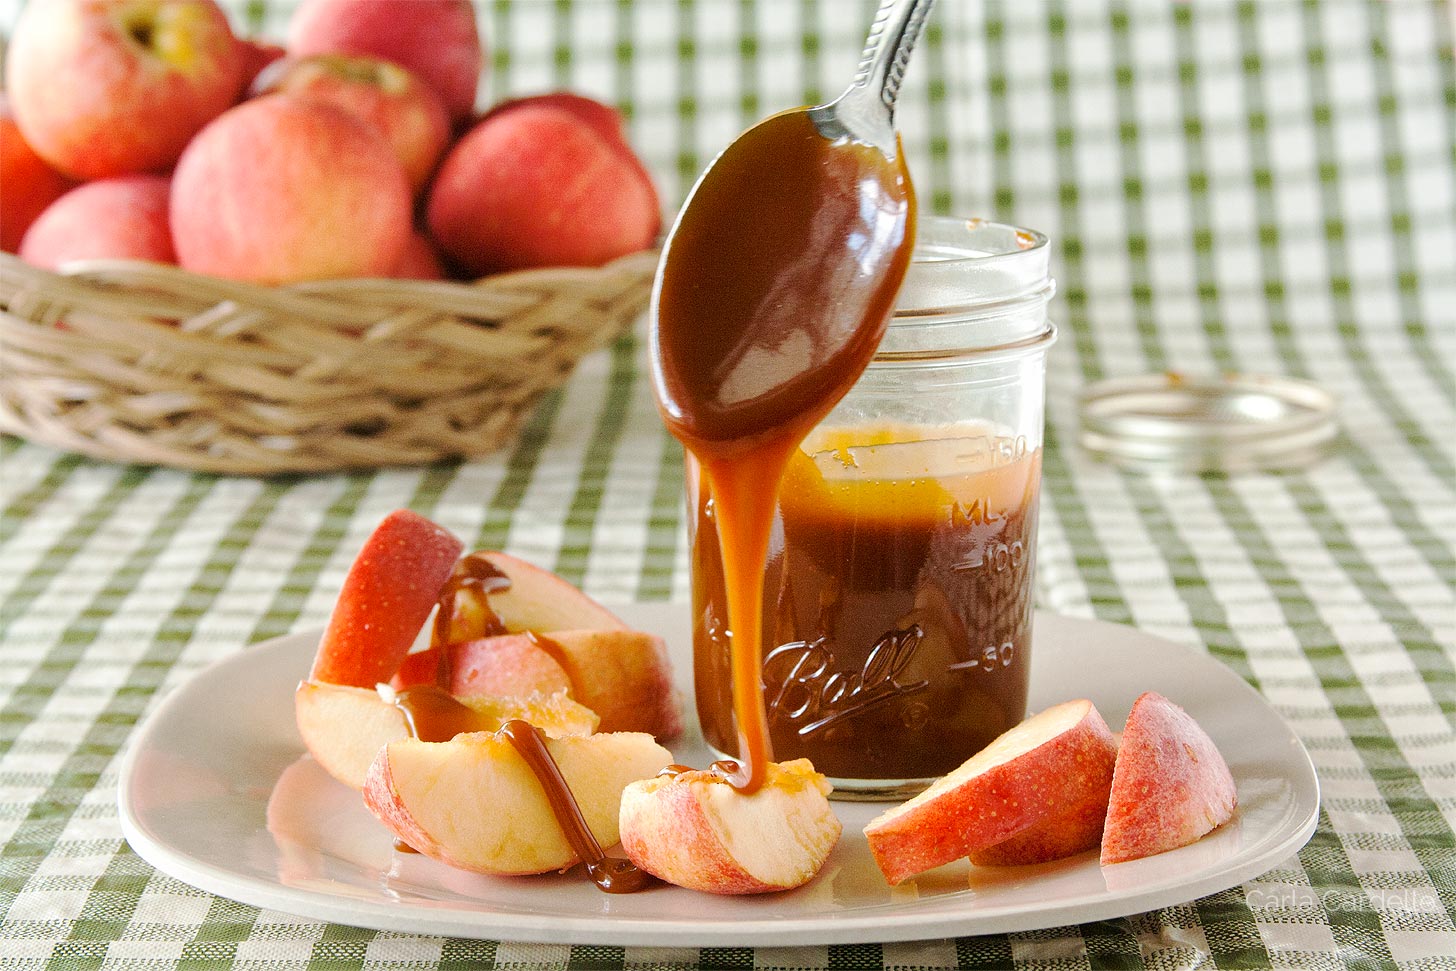 Caramel sauce dripping off spoon onto apple slices